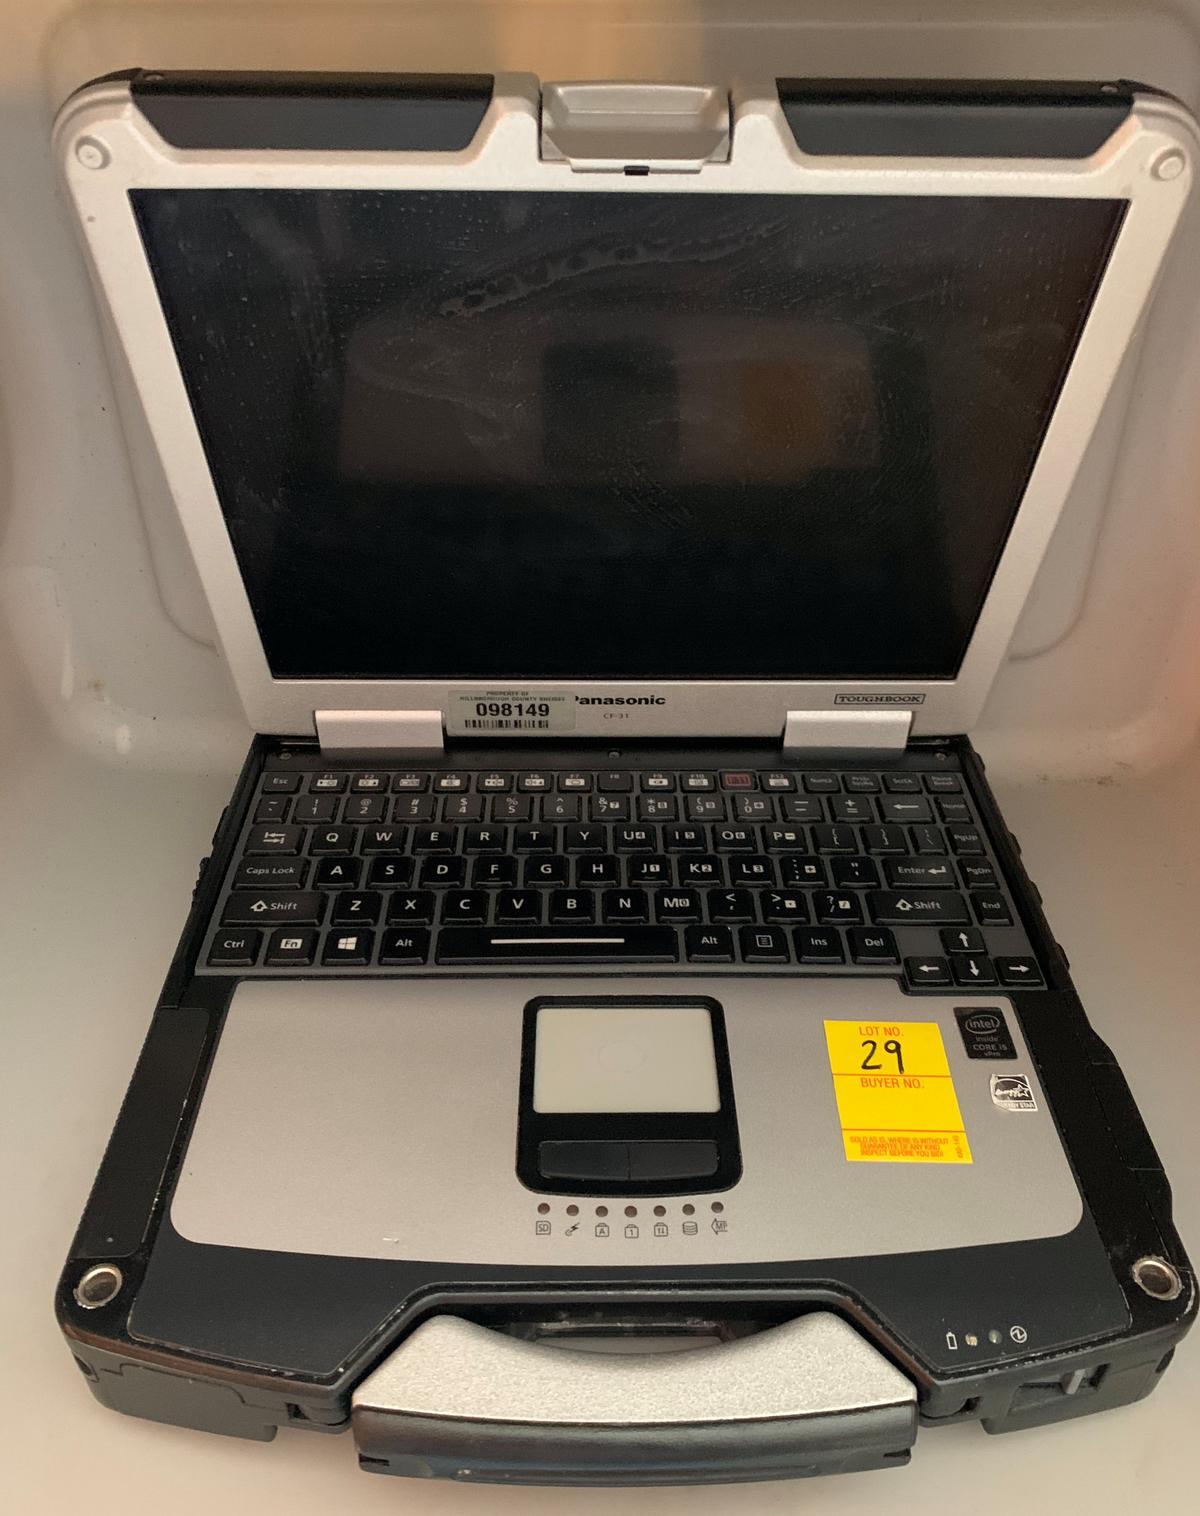 Qty. 5 - Panasonic Toughbook CF-31 (No Power Supply, missing side cover) X $